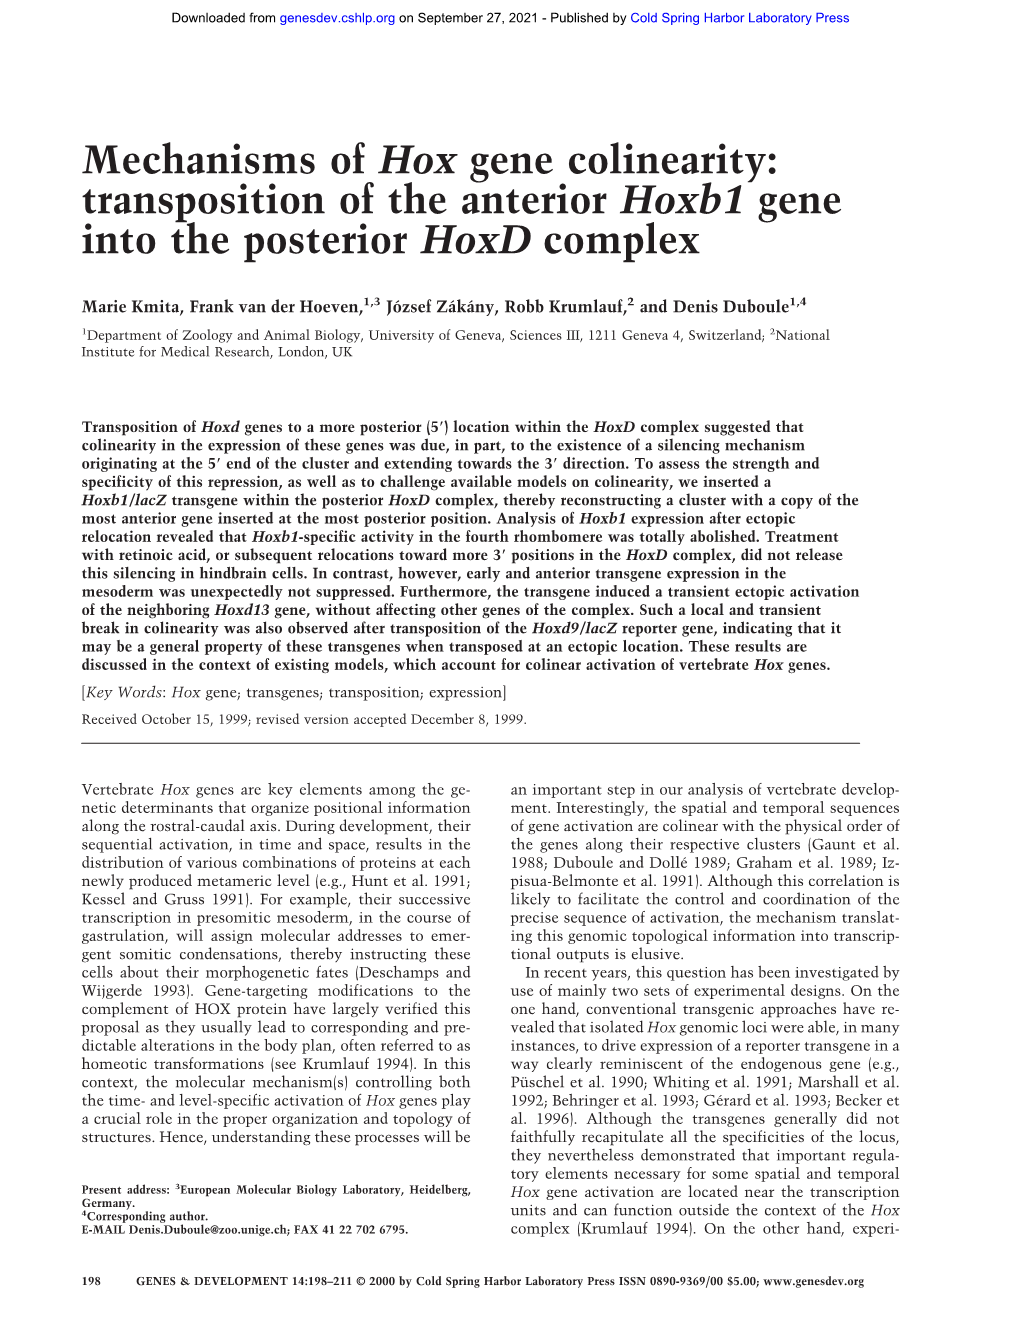 Transposition of the Anterior Hoxb1 Gene Into the Posterior Hoxd Complex